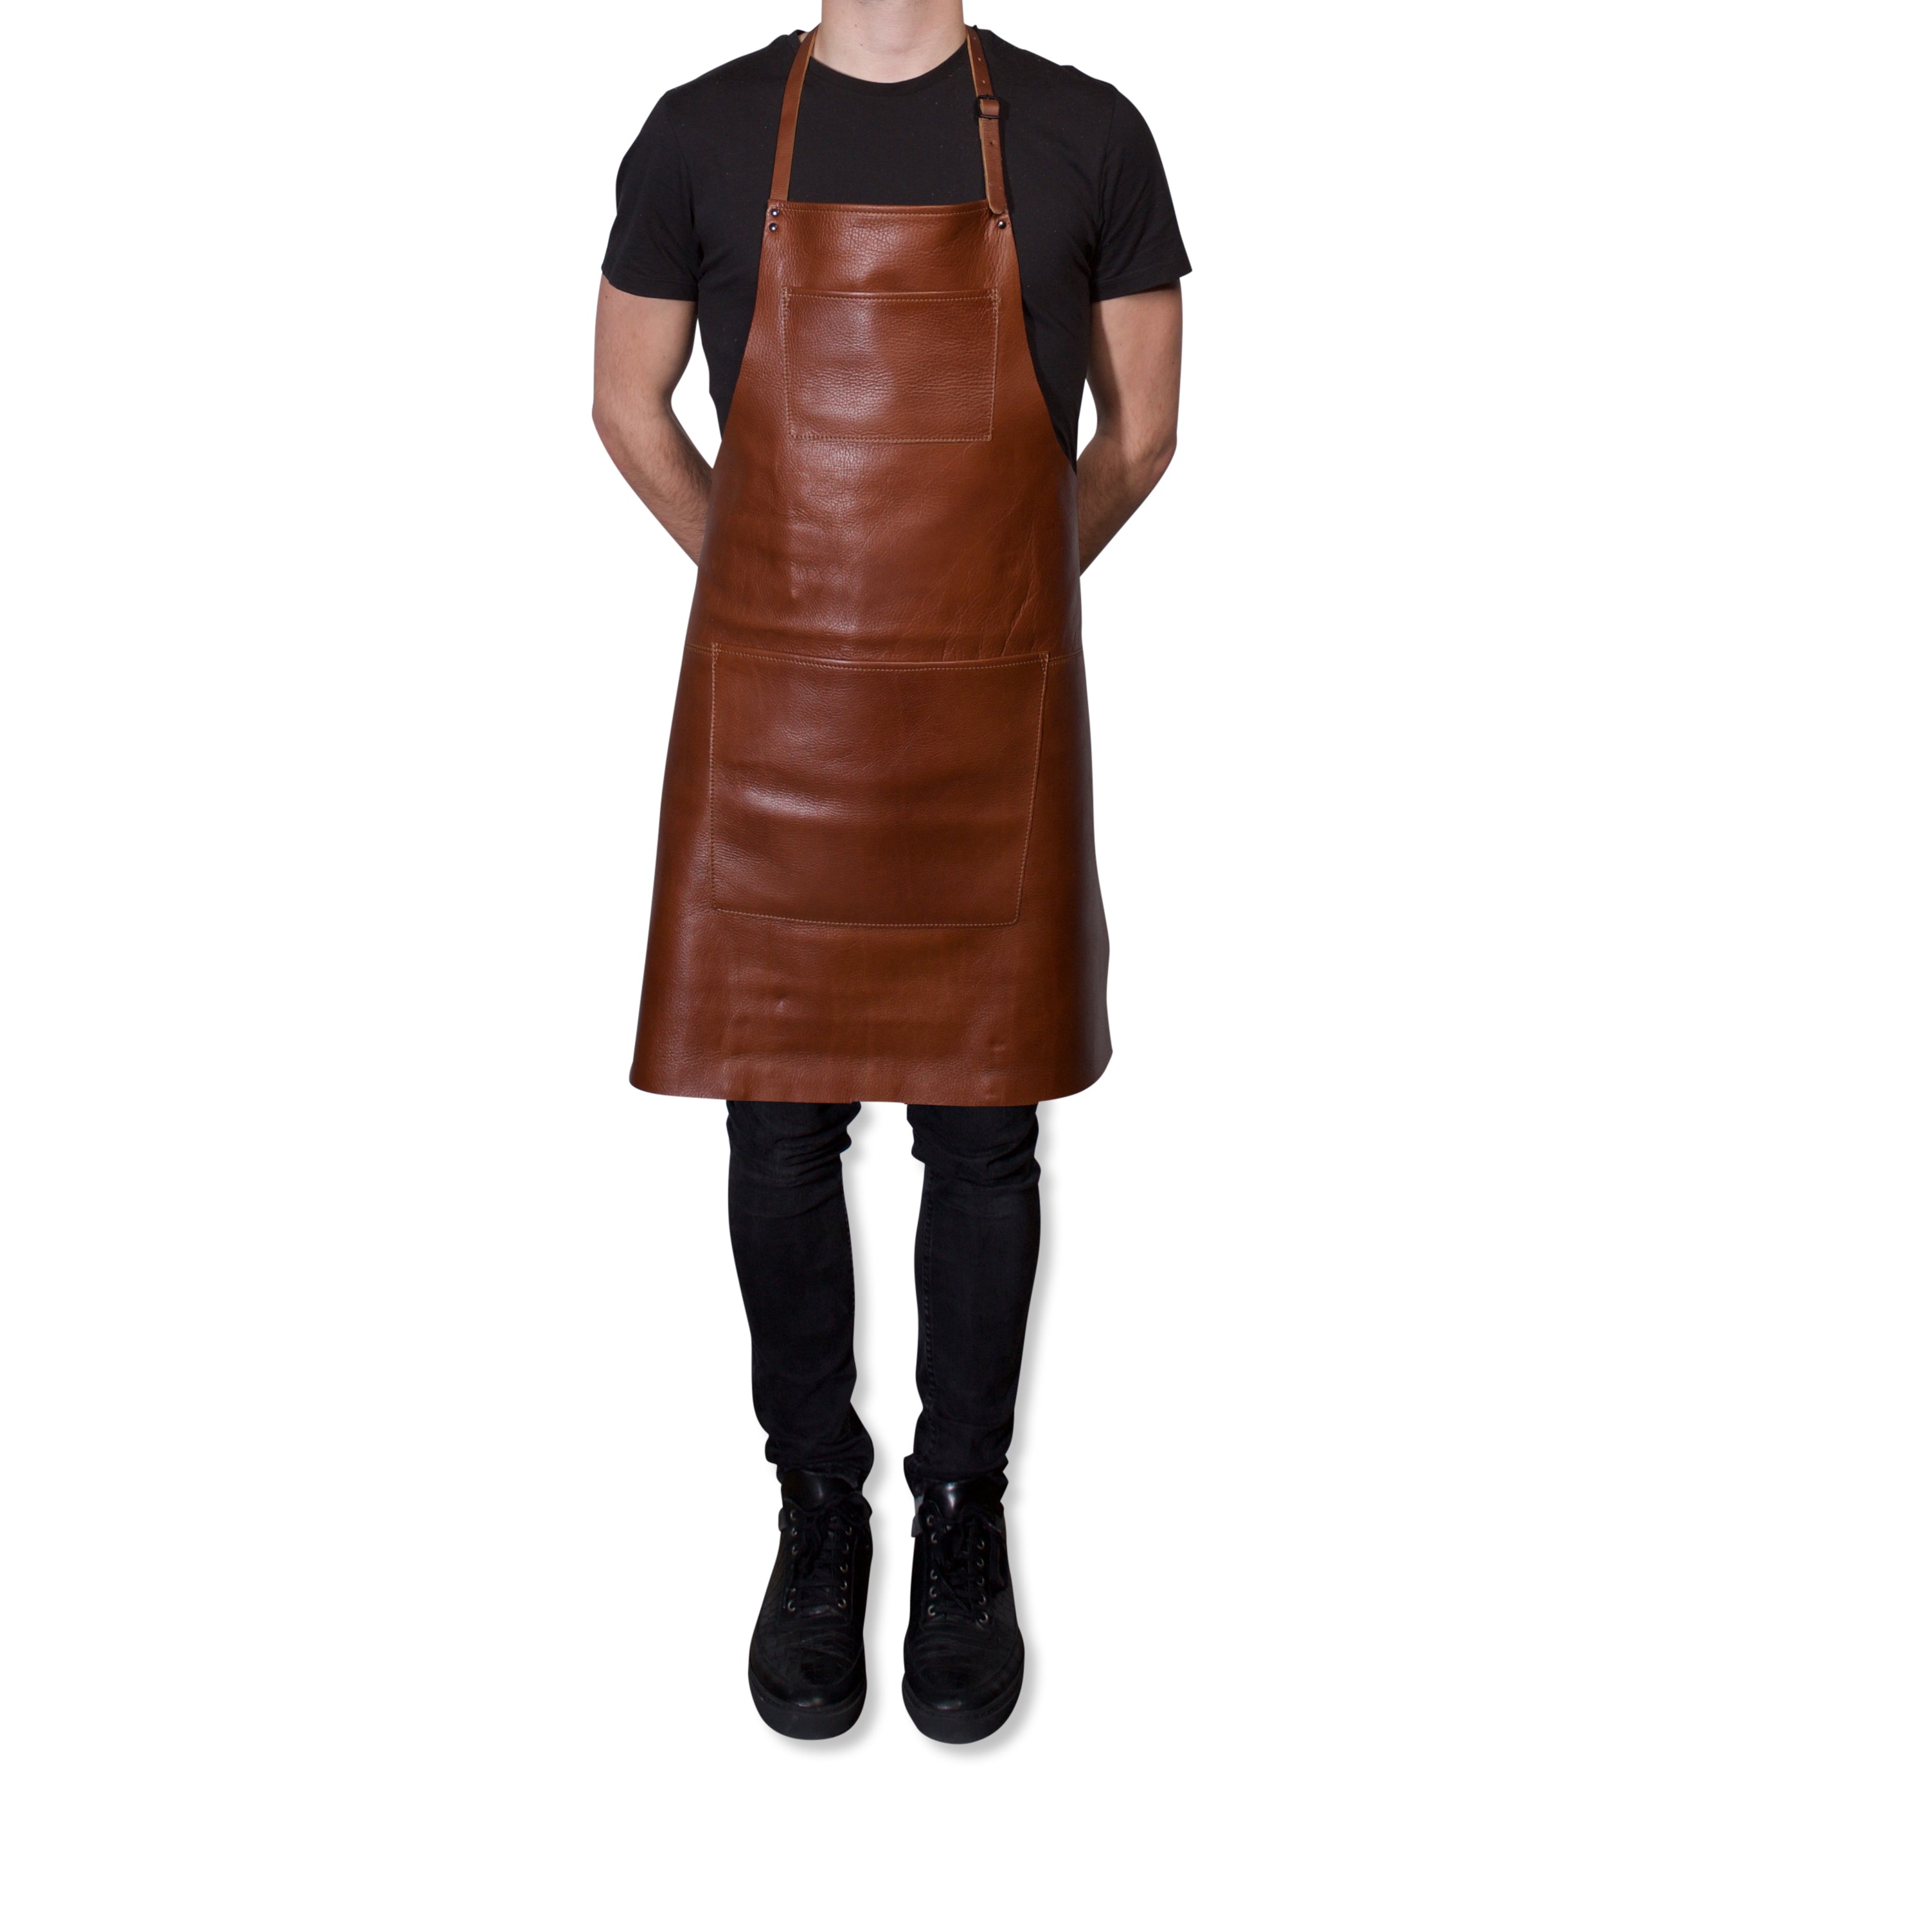 Dutchdeluxes Full Length Coated Classic Brown Leather "Professional Apron" - apron - Dutchdeluxes - Aprons - Brand_Dutchdeluxes - Dutchdeluxes - Fathers Day - KTFWHS - Textiles_Aprons - 0M5Z9992